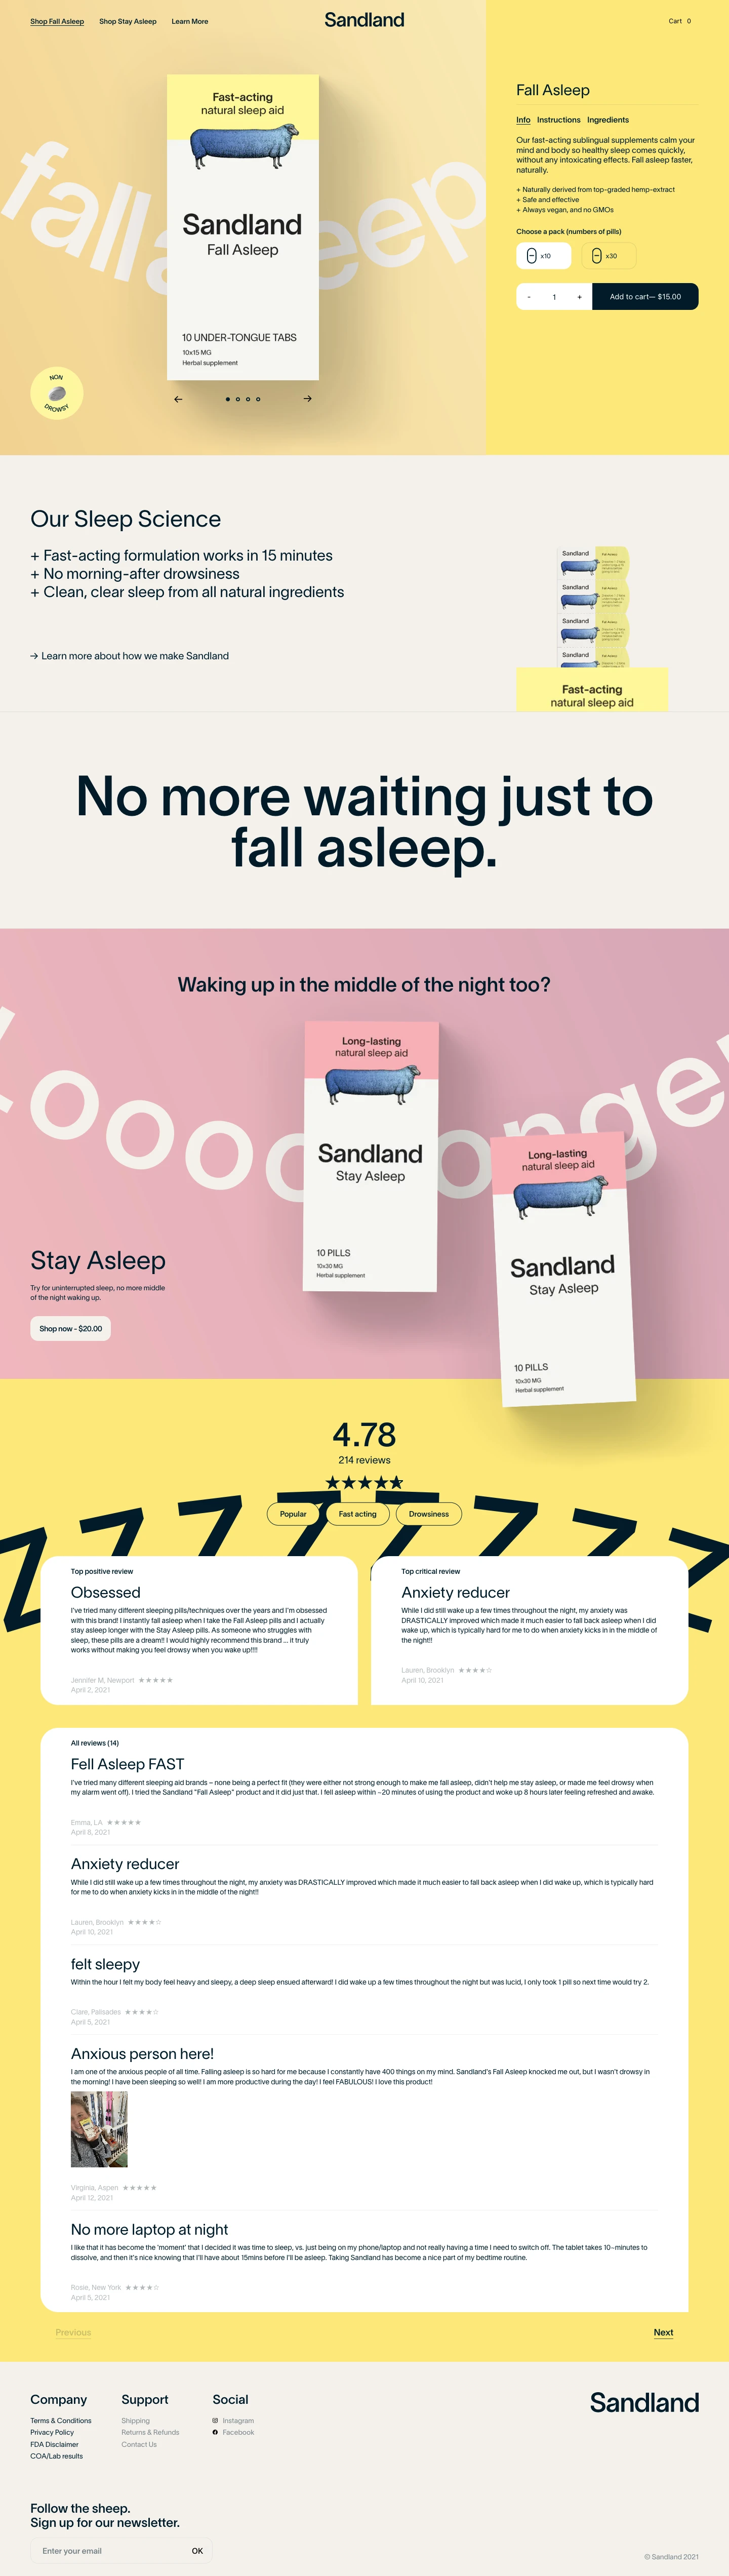 Sandland Landing Page Example: Where clean sleep comes easy. Learn how to get natural sleep, fall asleep faster and stay asleep longer. Sandland Sleep products are made from 100% plant-based natural ingredients.